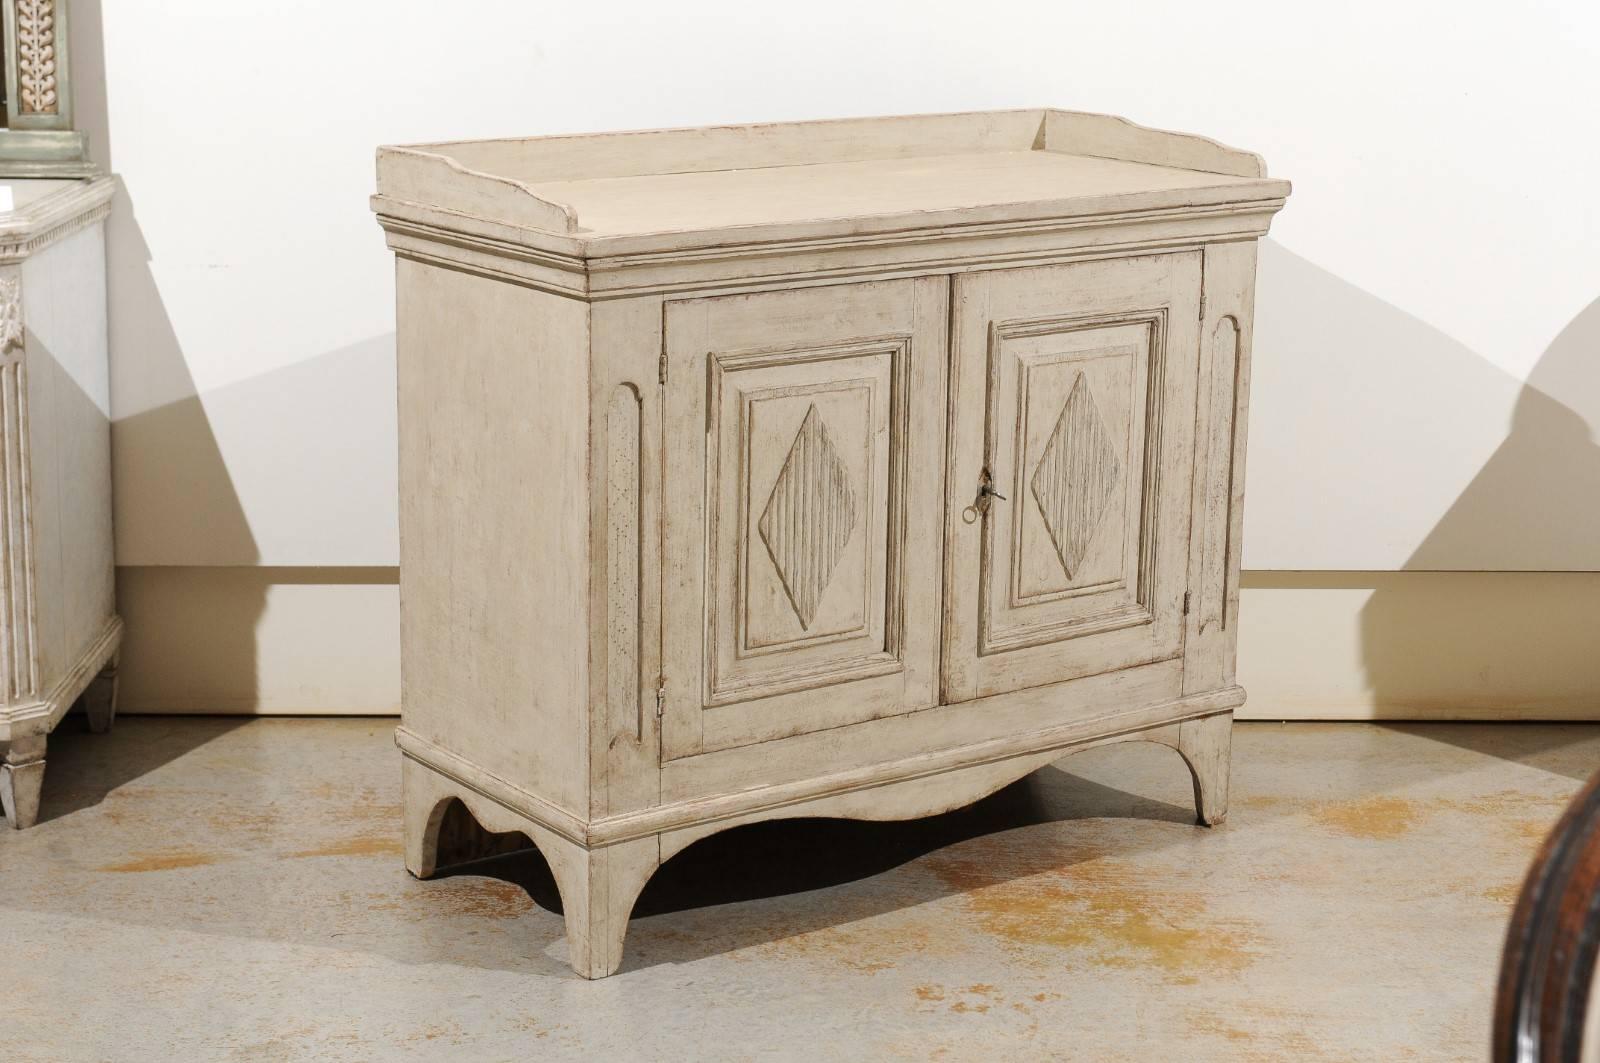 Wood 1810s Swedish Period Gustavian Painted Sideboard with Reeded Diamond Motifs